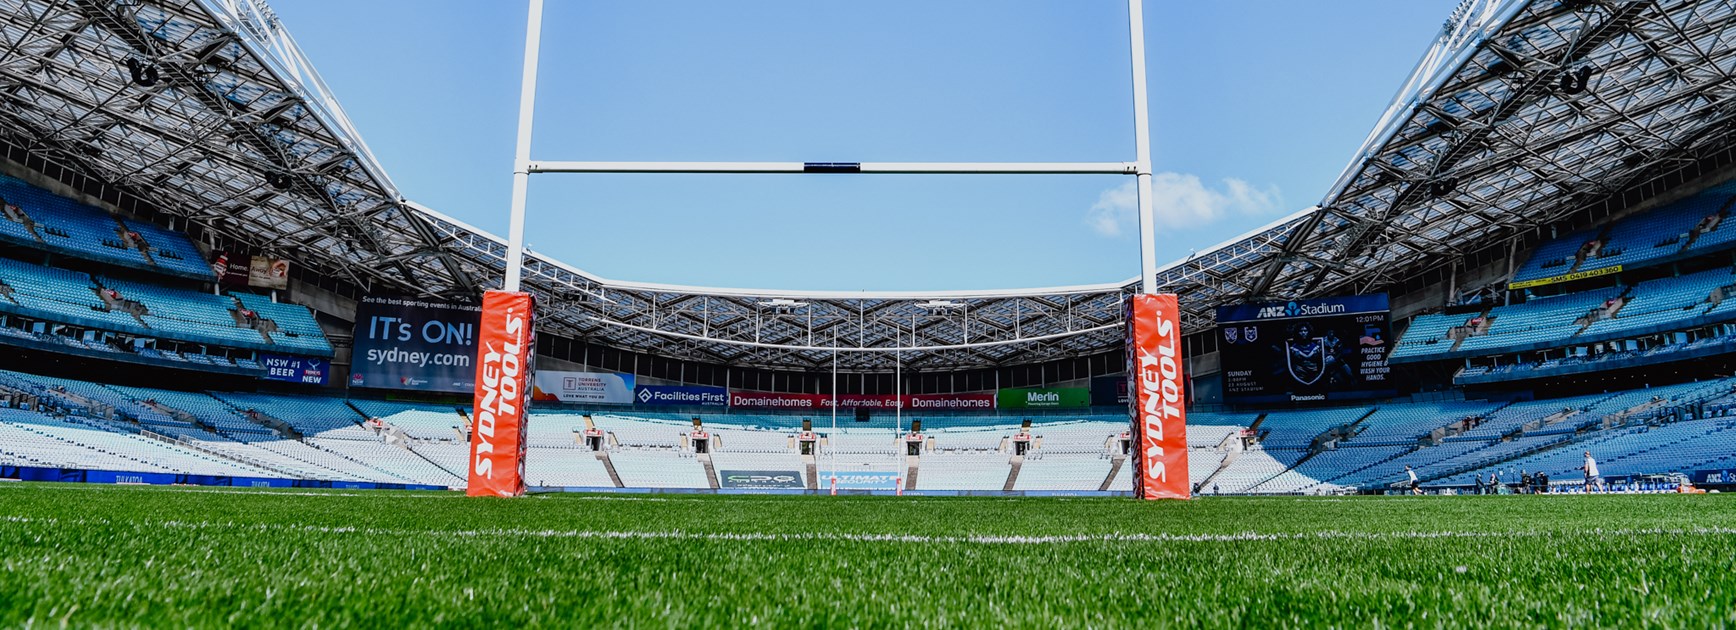 ANZ Stadium to host final home game of 2020